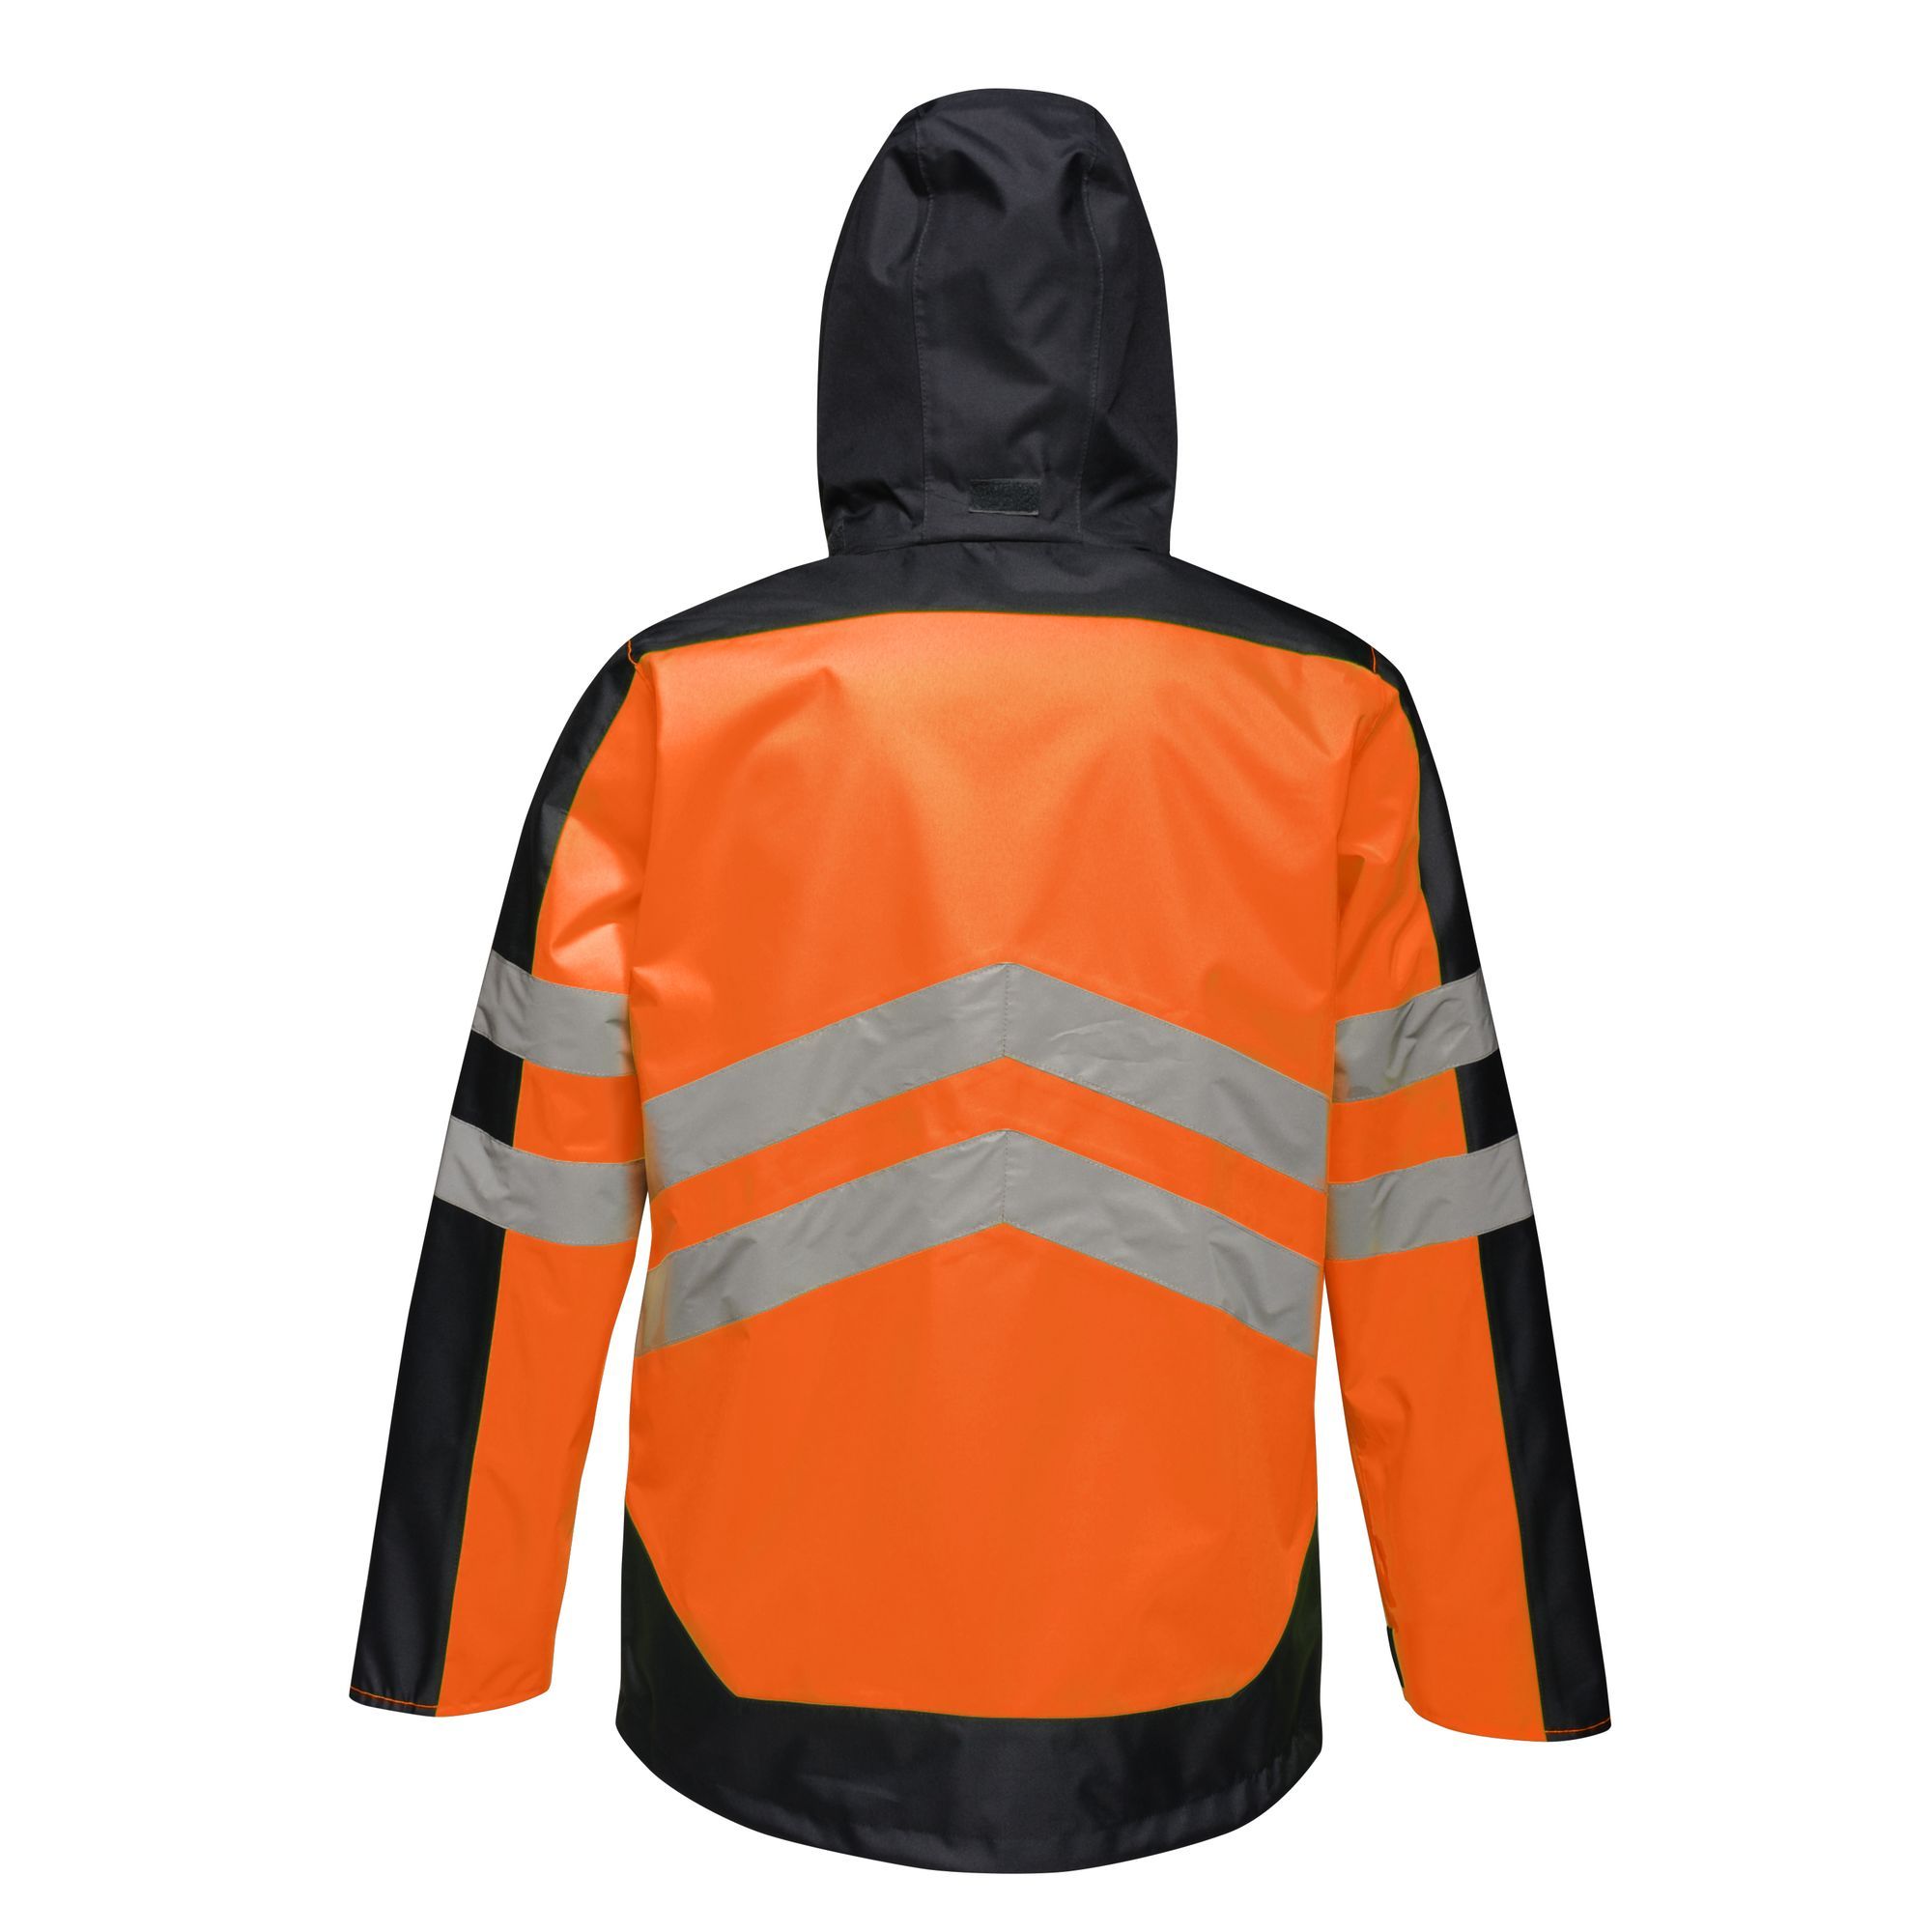 Material: 100% polyester. Isotex 10000 polyester fabric. Waterproof and breathable. Conforms to EN343:2003 A1:2007 Class 3:3. EN ISO 20471:2013 + A1:2016 Class 3. Windproof. Thermoguard insulation. Taped seams. Concealed hood with adjusters. 2 zipped lower pockets and easy access, hidden chest pockets with zip. Orange colour-way also conforms to RIS-3279/TOM when worn with RIS-3279-TOM Class 2 upper body cloth. Inner stormflap with chin guard. Size (chest): (XXS) 32-34in, (XS) 35-36in, (S) 37-38in, (M) 39-40in, (L) 41-42in, (XL) 43-44in, (XXL) 46-48in, (3XL) 49-51in, (4XL) 52-54in, (5XL) 55-57in, (6XL) 58-60in.